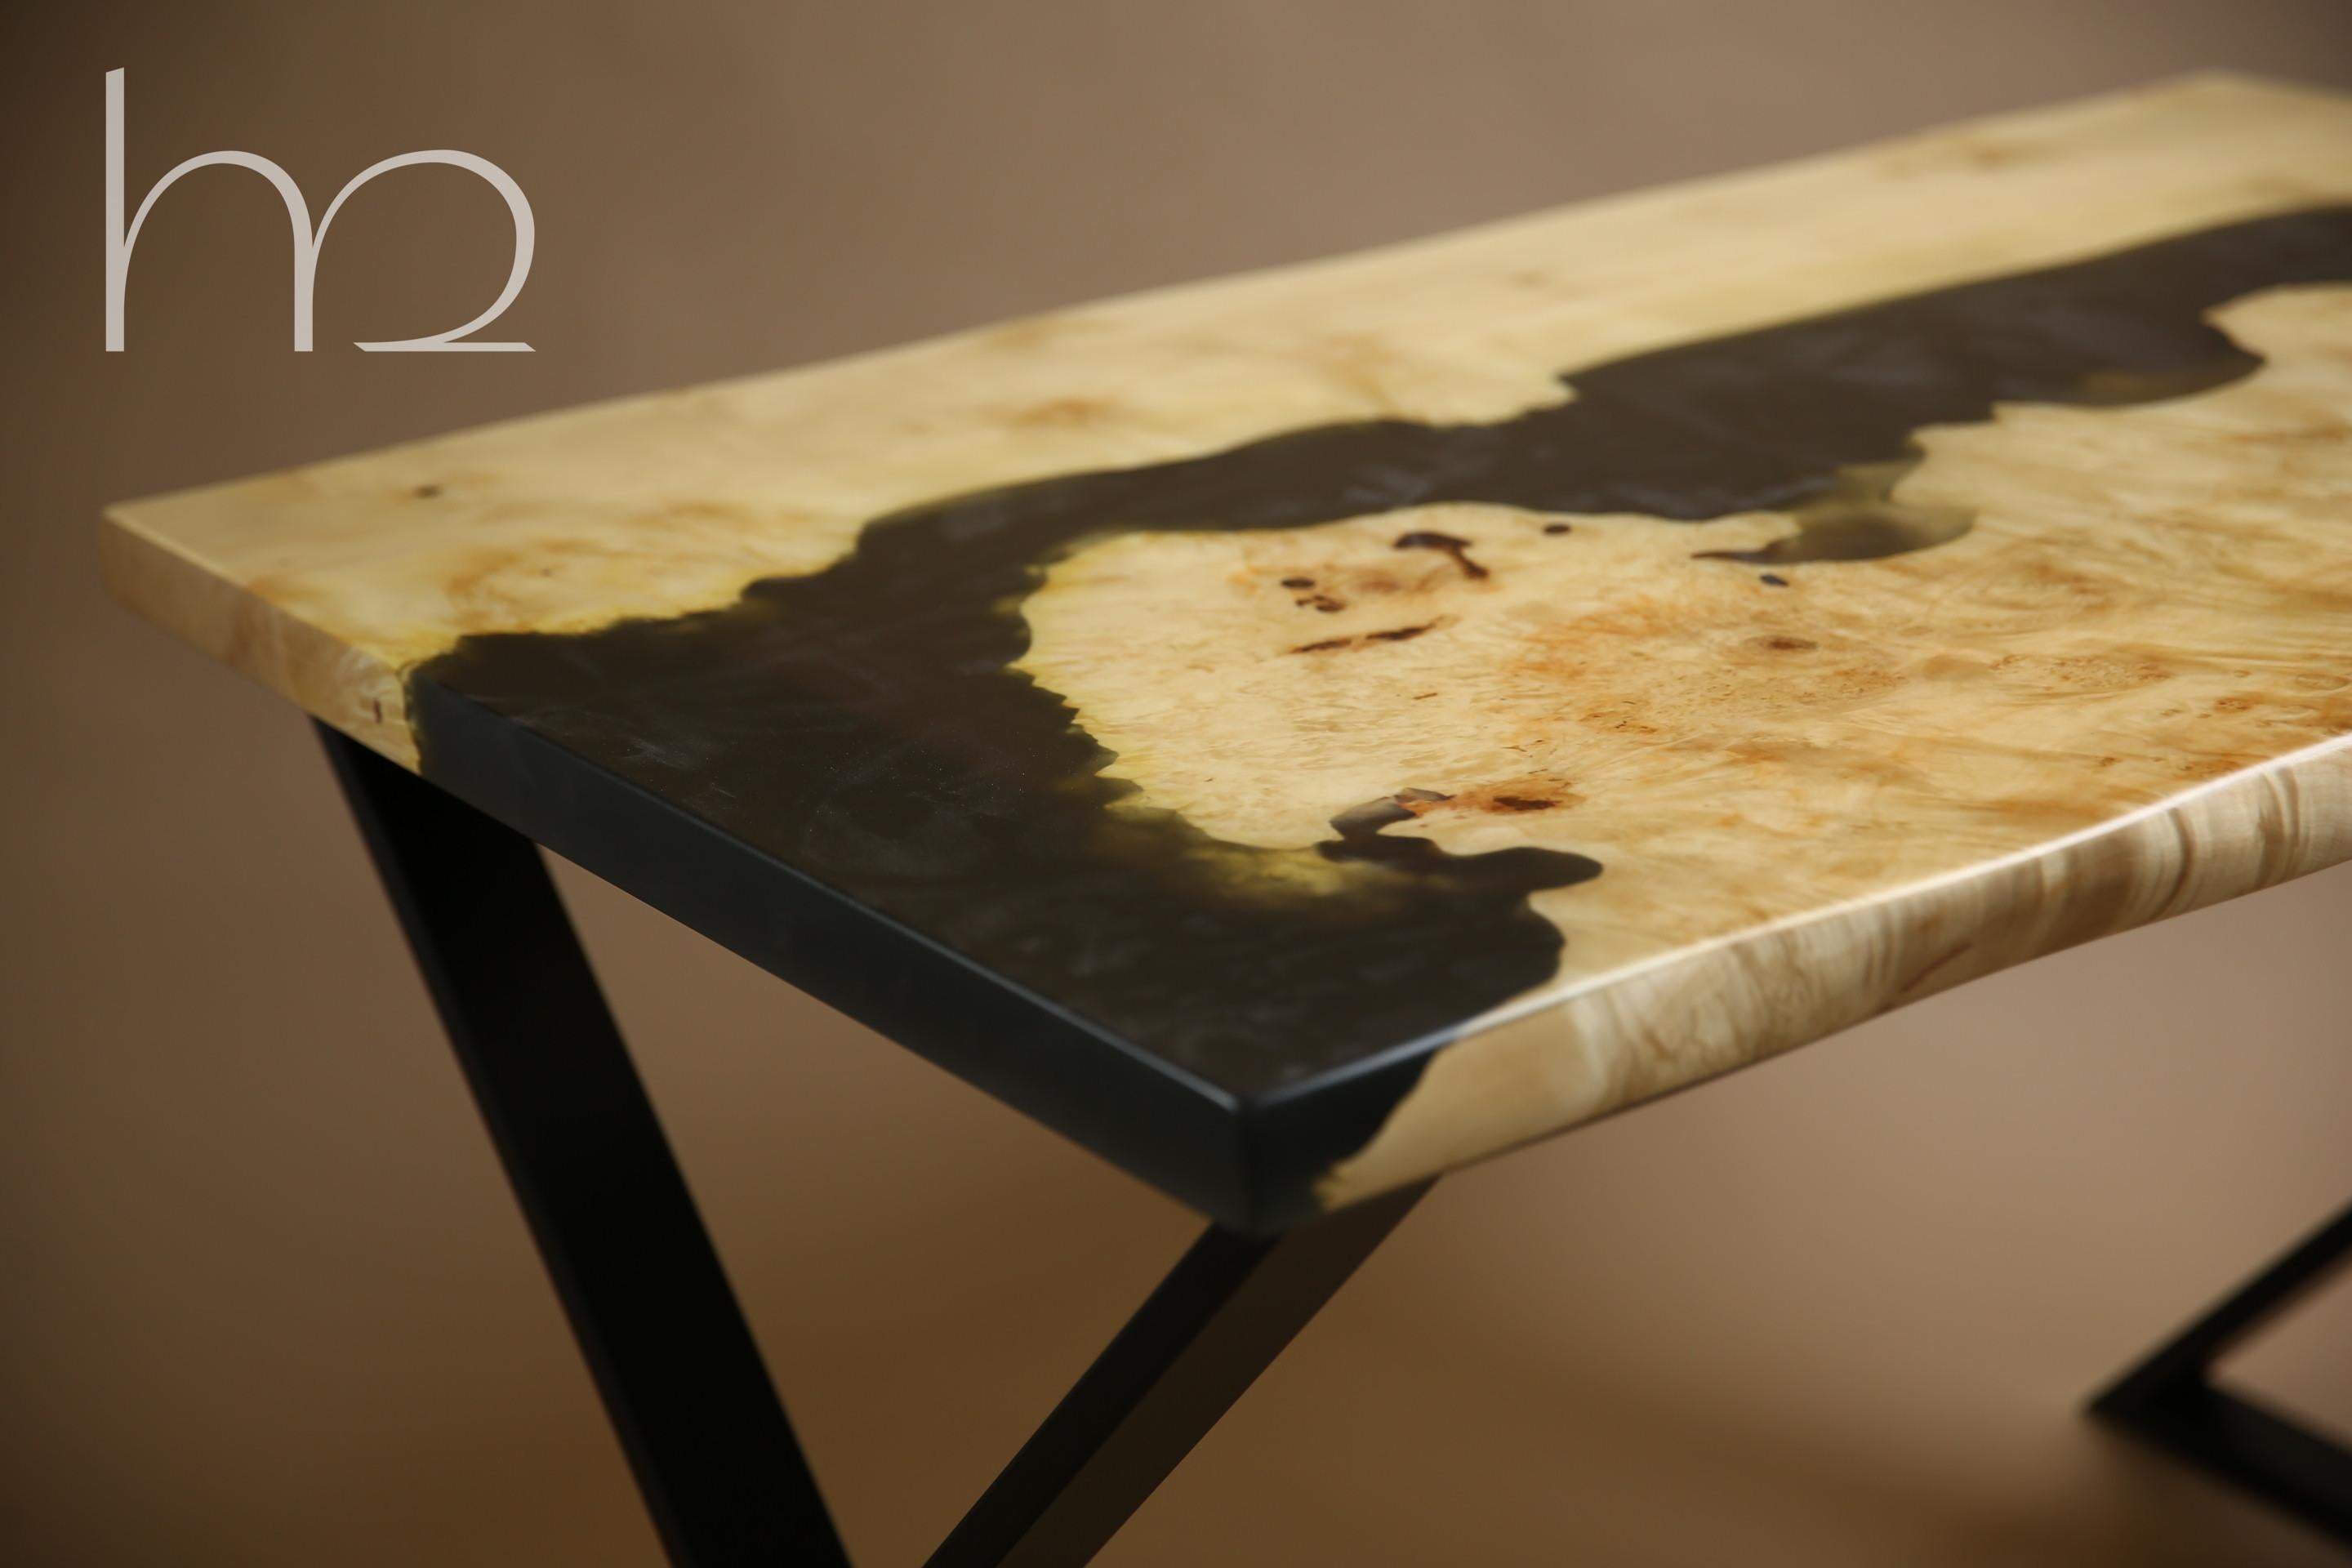 Do you like contrasts? I think that life is made up of contrasts. Cold and heat, thirst and satiety, poverty and abundance, difficult circumstances and victory over them.
This table is made from old white maple slabs and black epoxy. Contrast table.